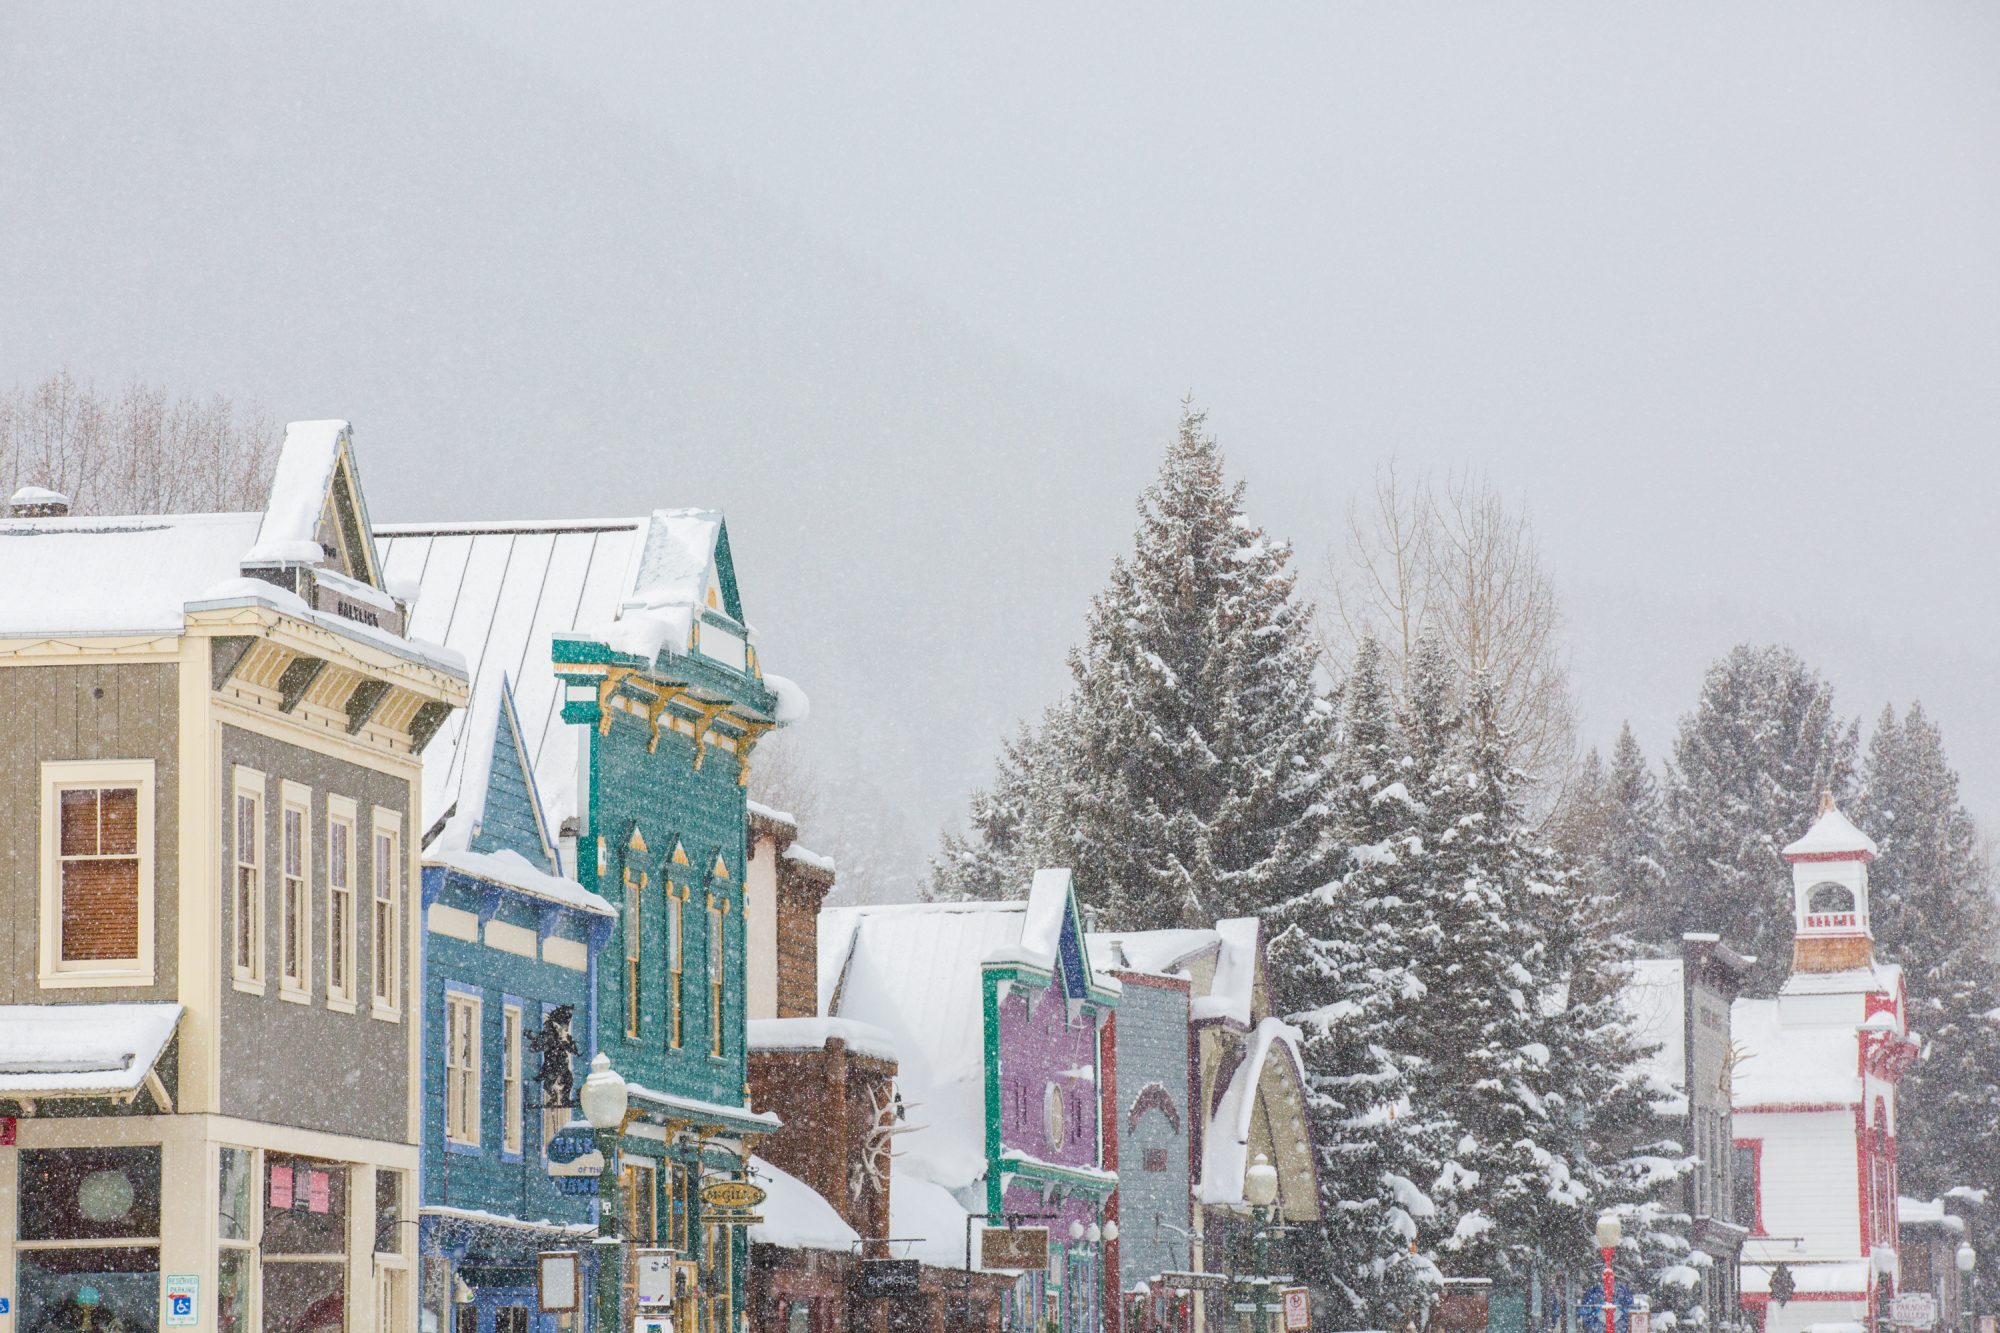 Crested Butte Mountain Resort. The town of Crested Butte, Elk Avenue- Photo: Taylor Ahearn. Crested Butte Mountain Resort Announces Plans to Replace the Teocalli Lift for the 2019-20 Winter Season.